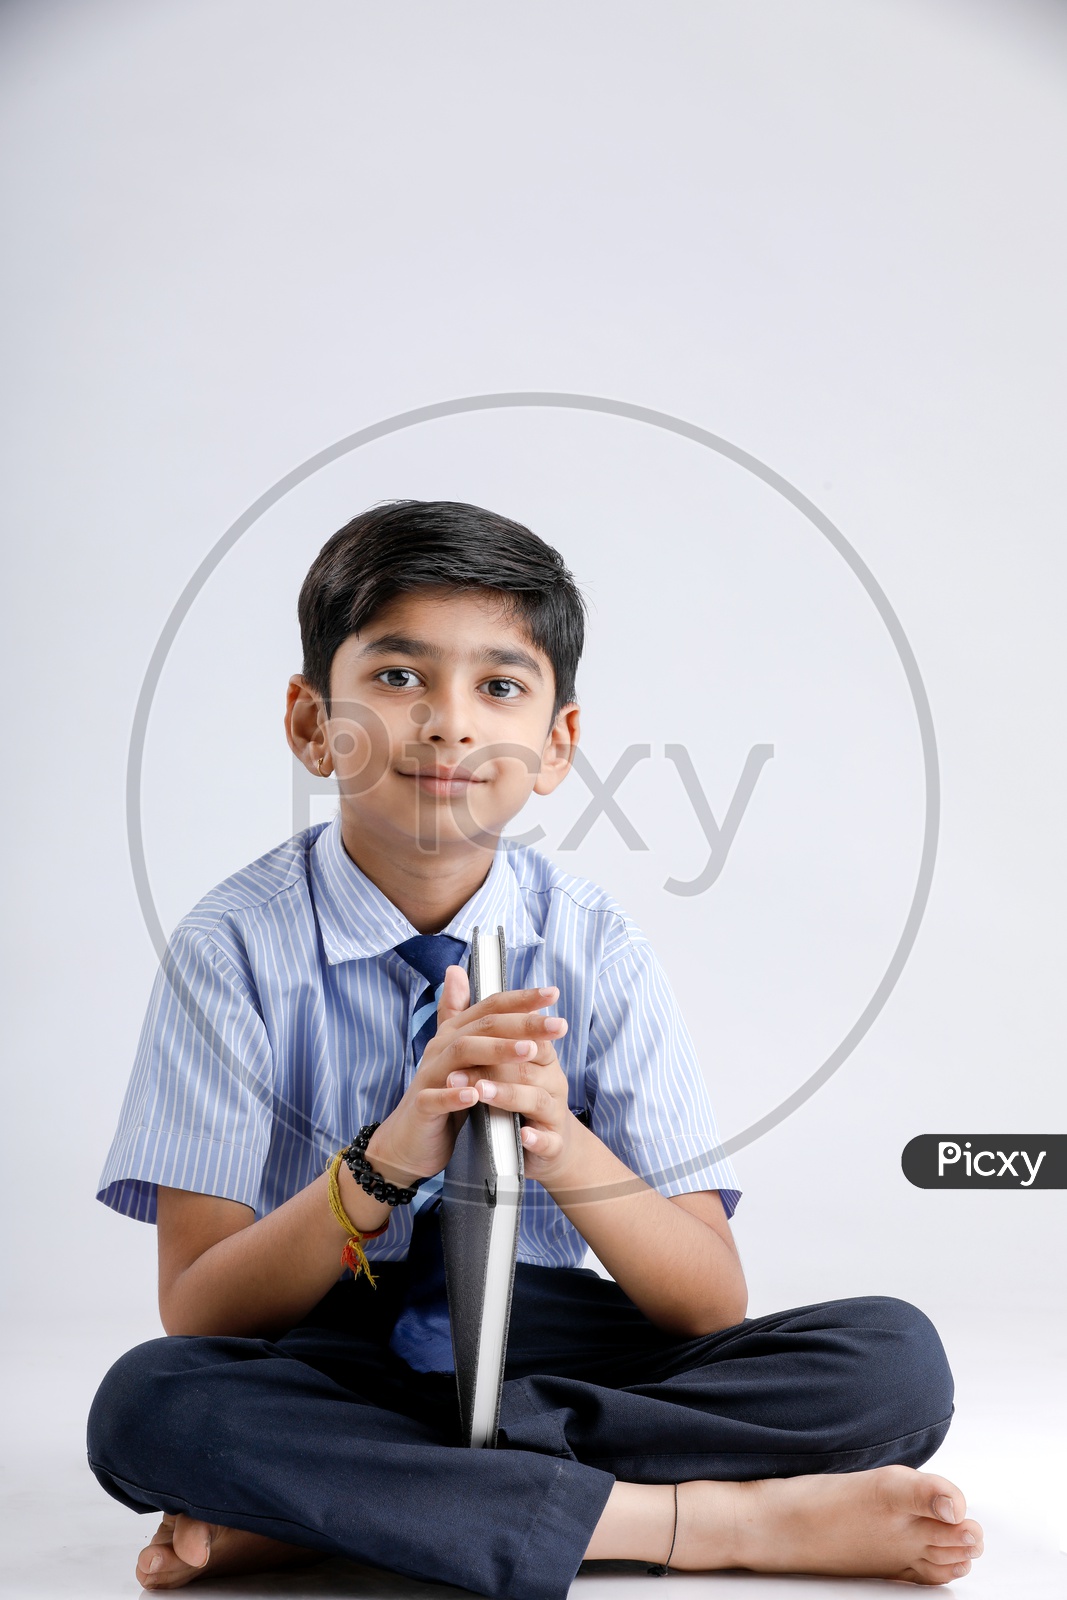 Indian or Asian Kid Or Boy Or Student  In School Uniform And Holding Book Over an Isolated White Background